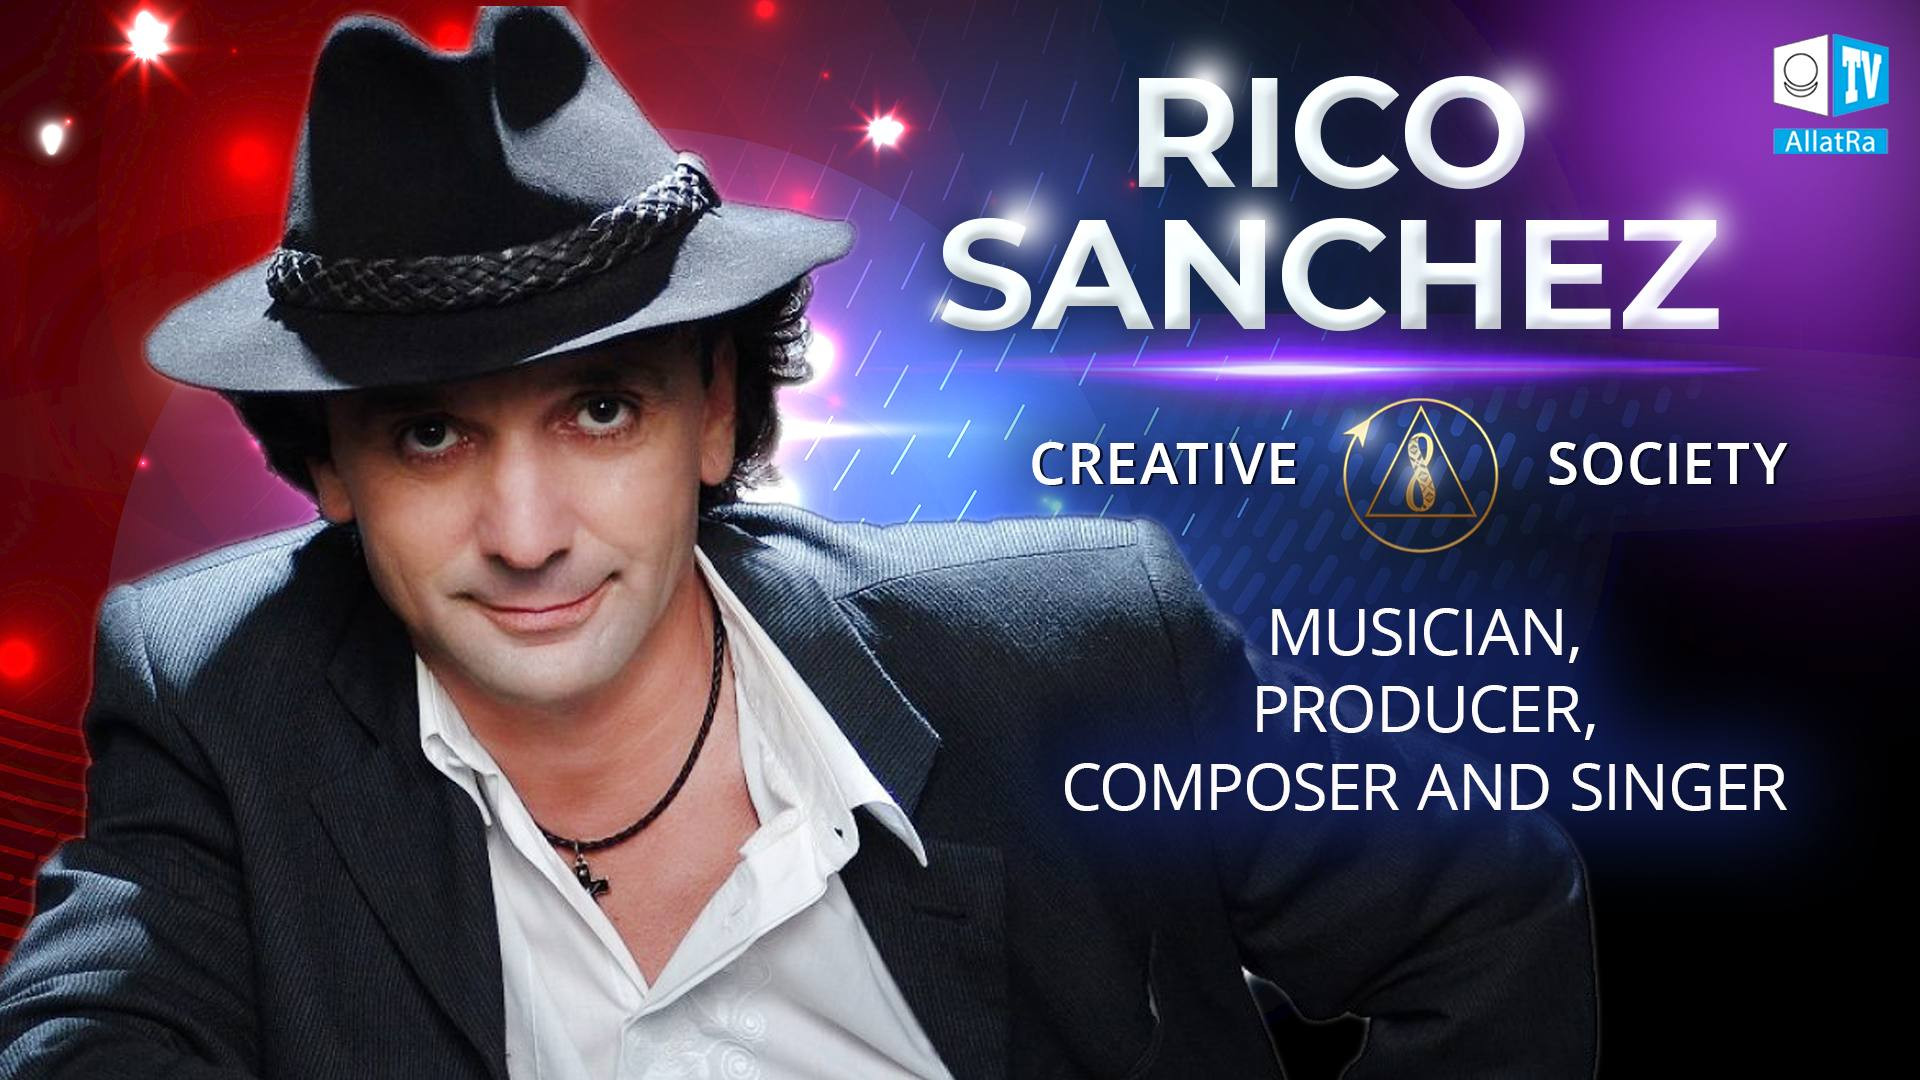 Rico Sanchez | Famous Musician and Producer about Creative Society